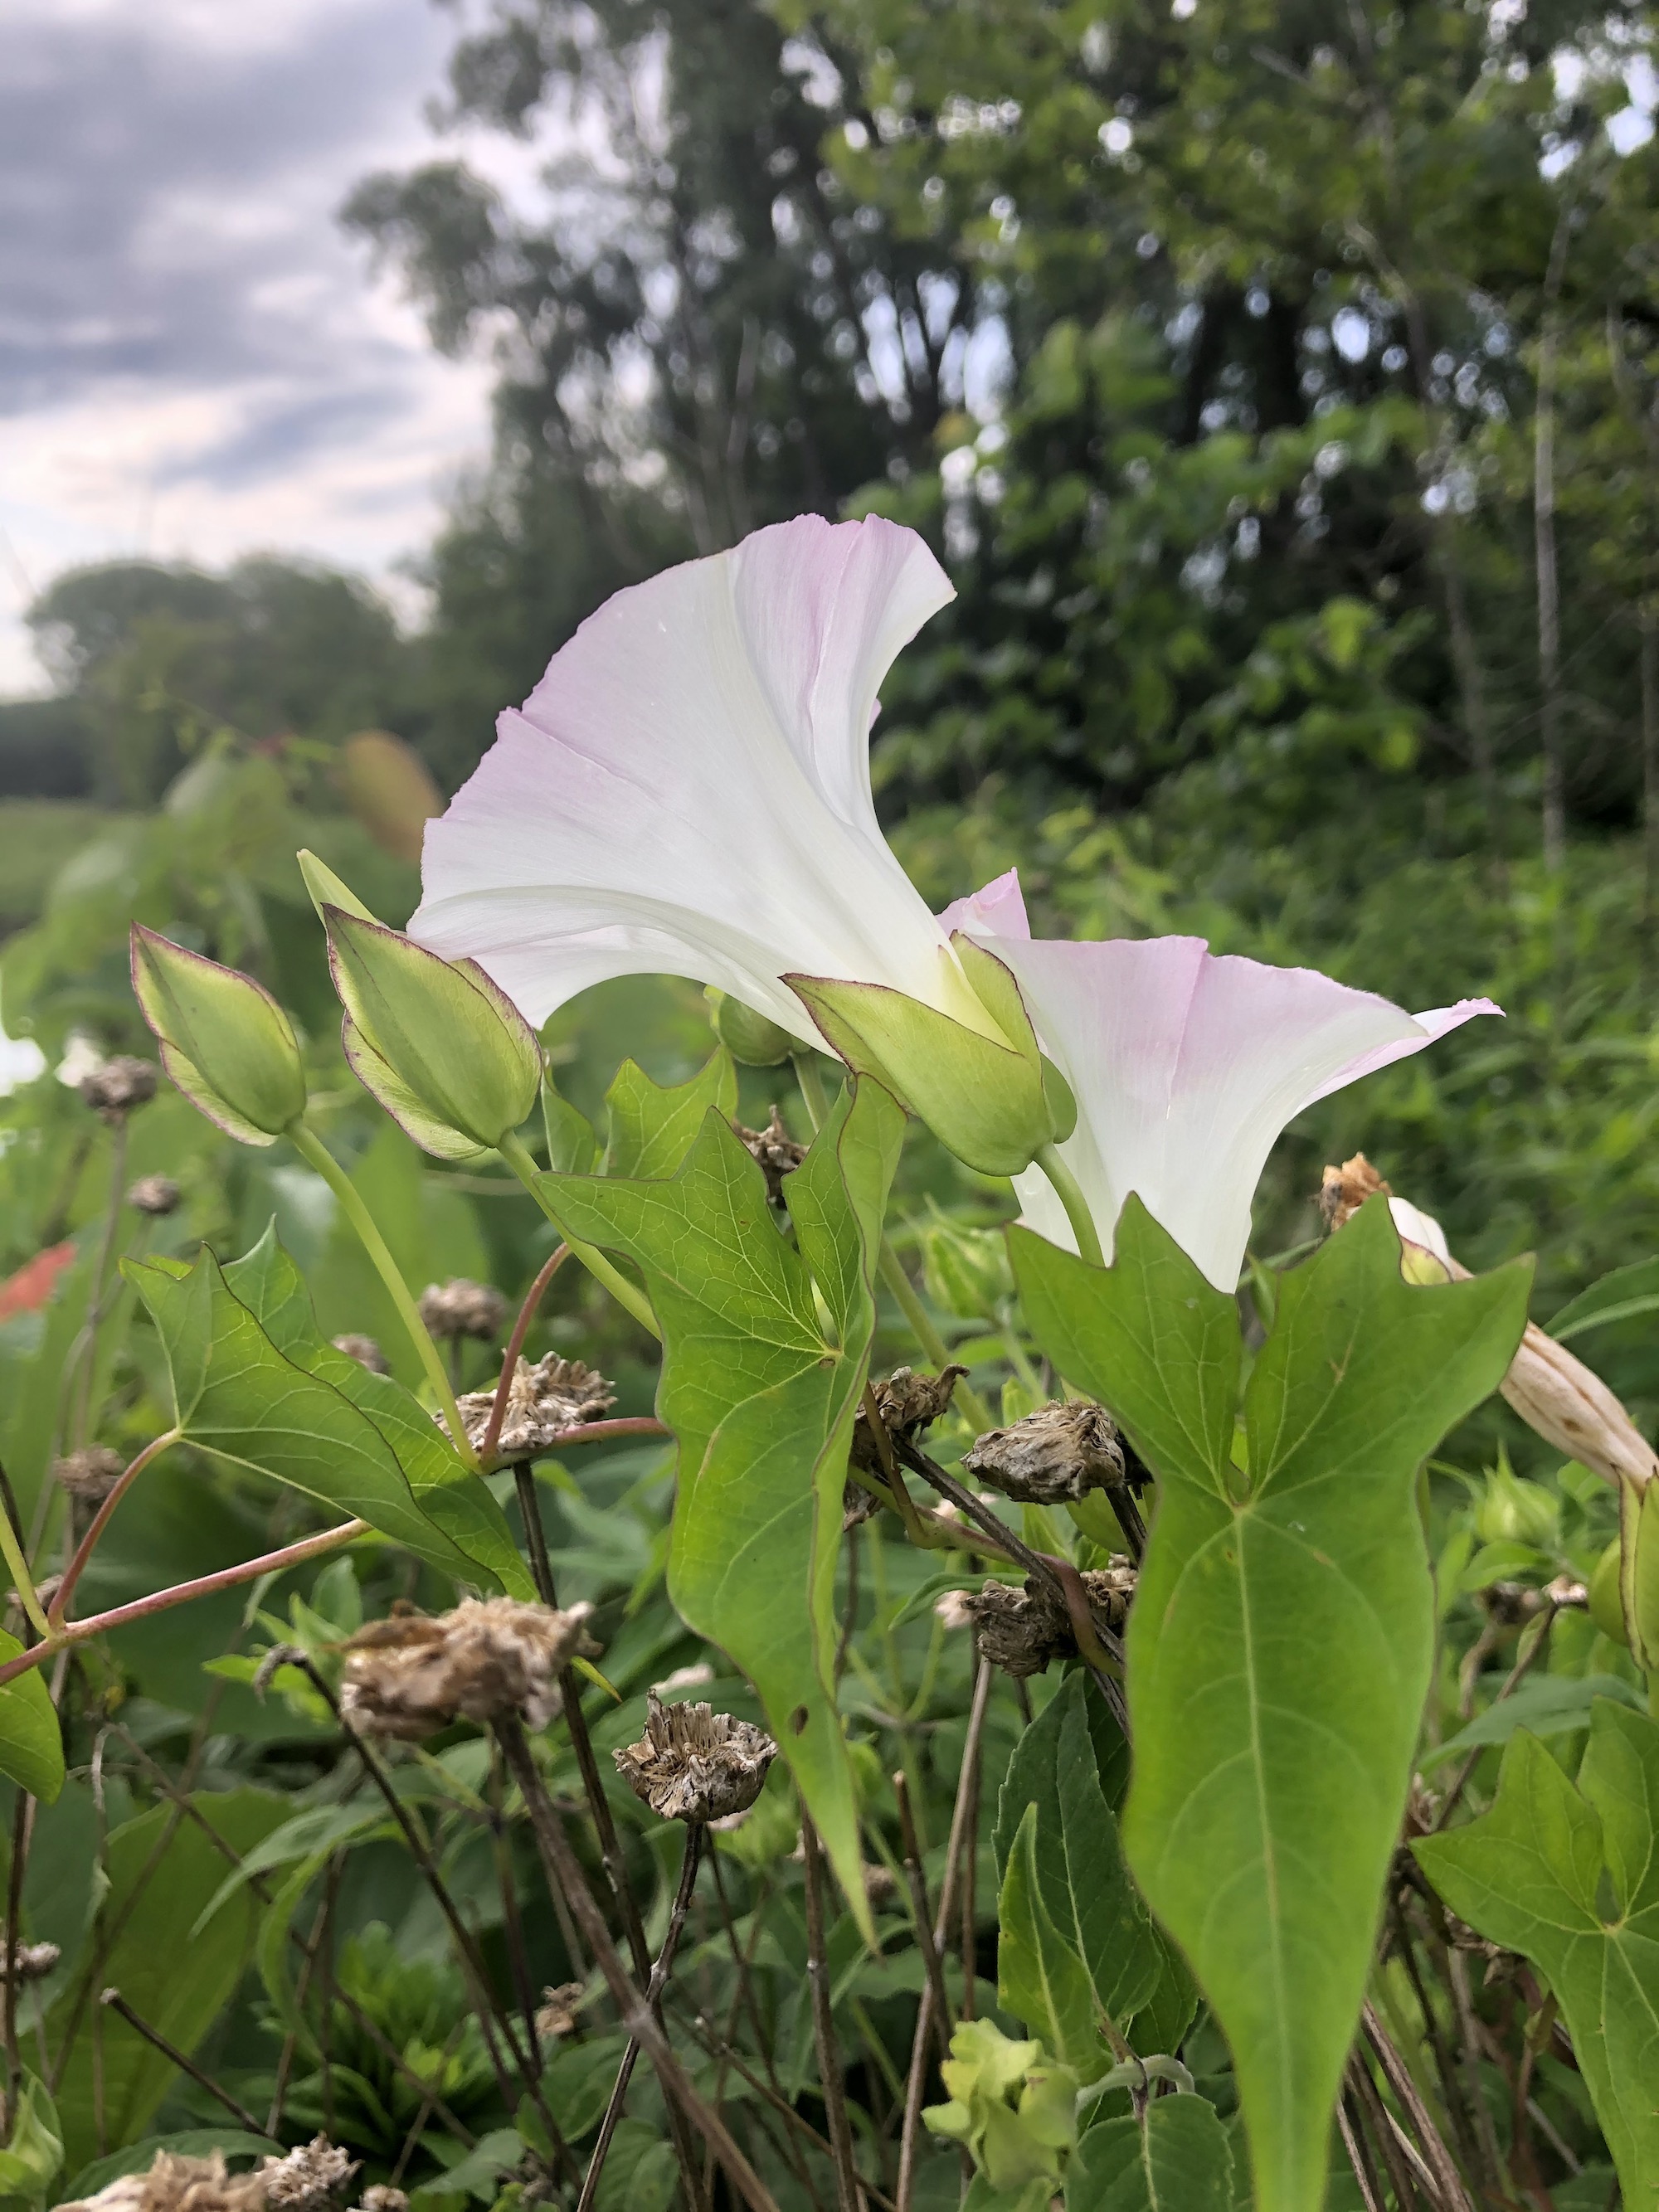 Hedge Bindweed on shore of Marion Dunn Pond in Madison, Wisconsin on July 6, 2020.